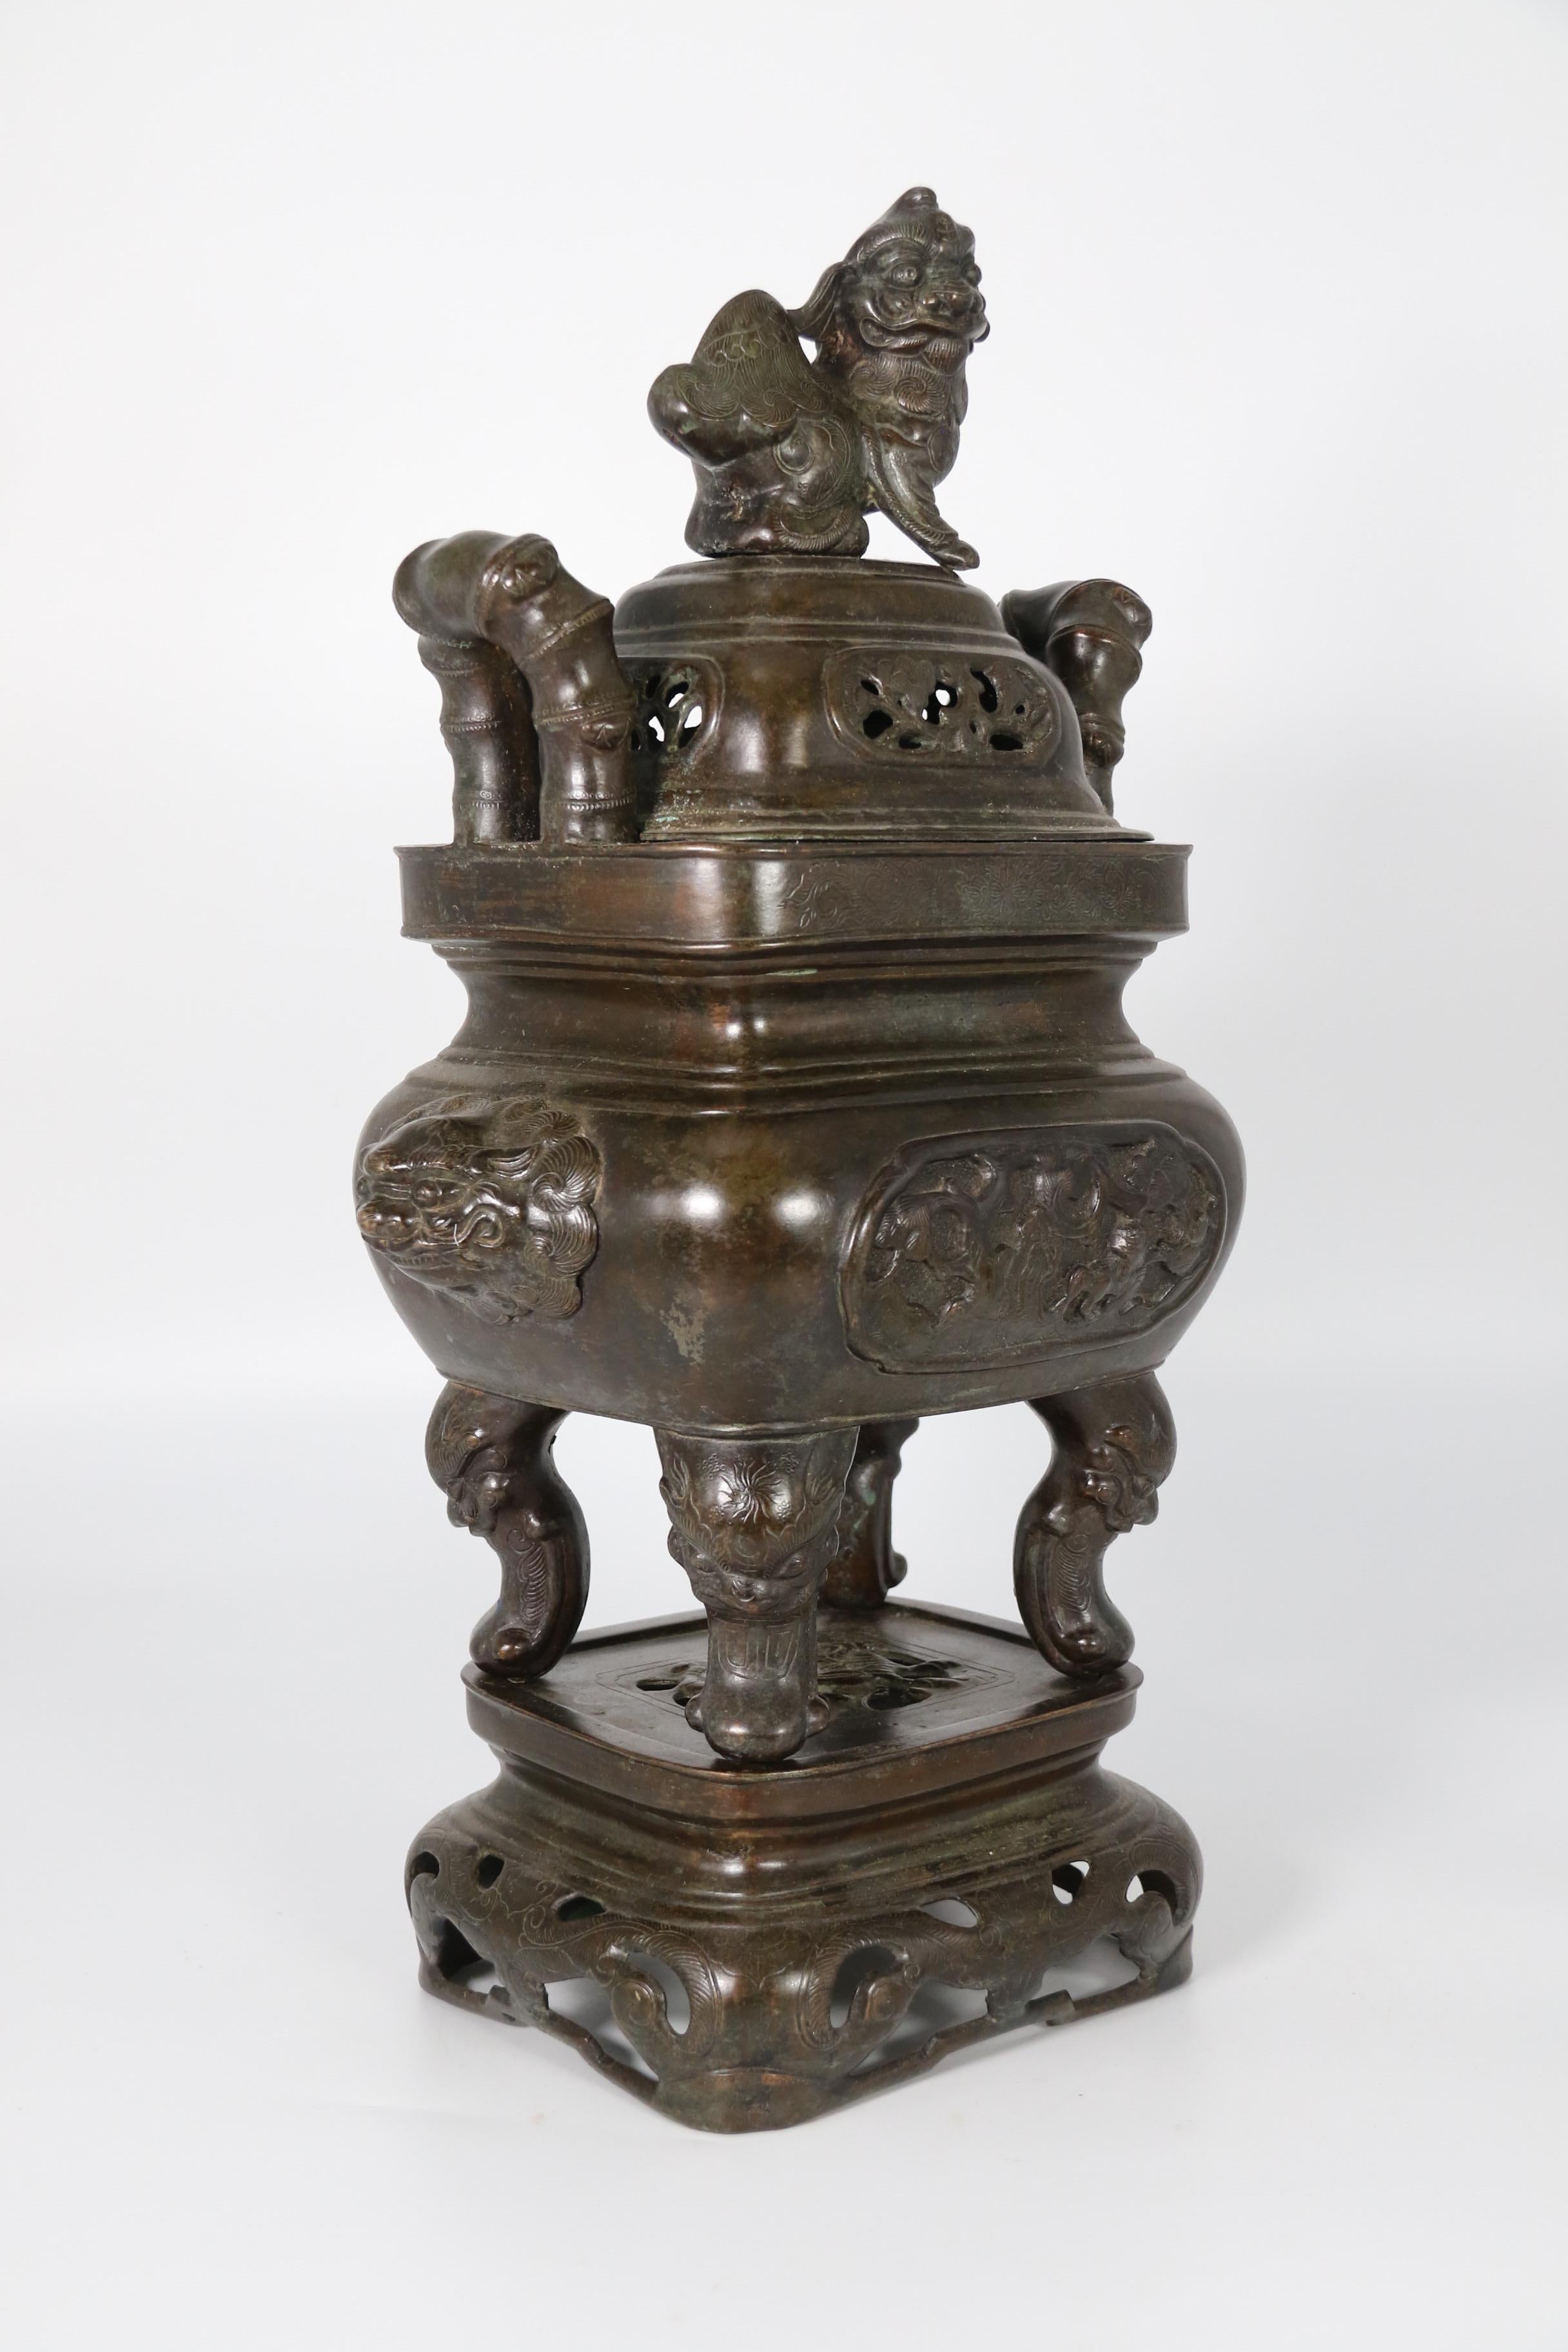 This large Chinese bronze censer dates to circa 1860. It is made in three parts, stand, vessel, and lid. The lid has pierced decorative panels with pine trees and a bold Buddhist lion finial for lifting.
The censer has lifting handles in the shape